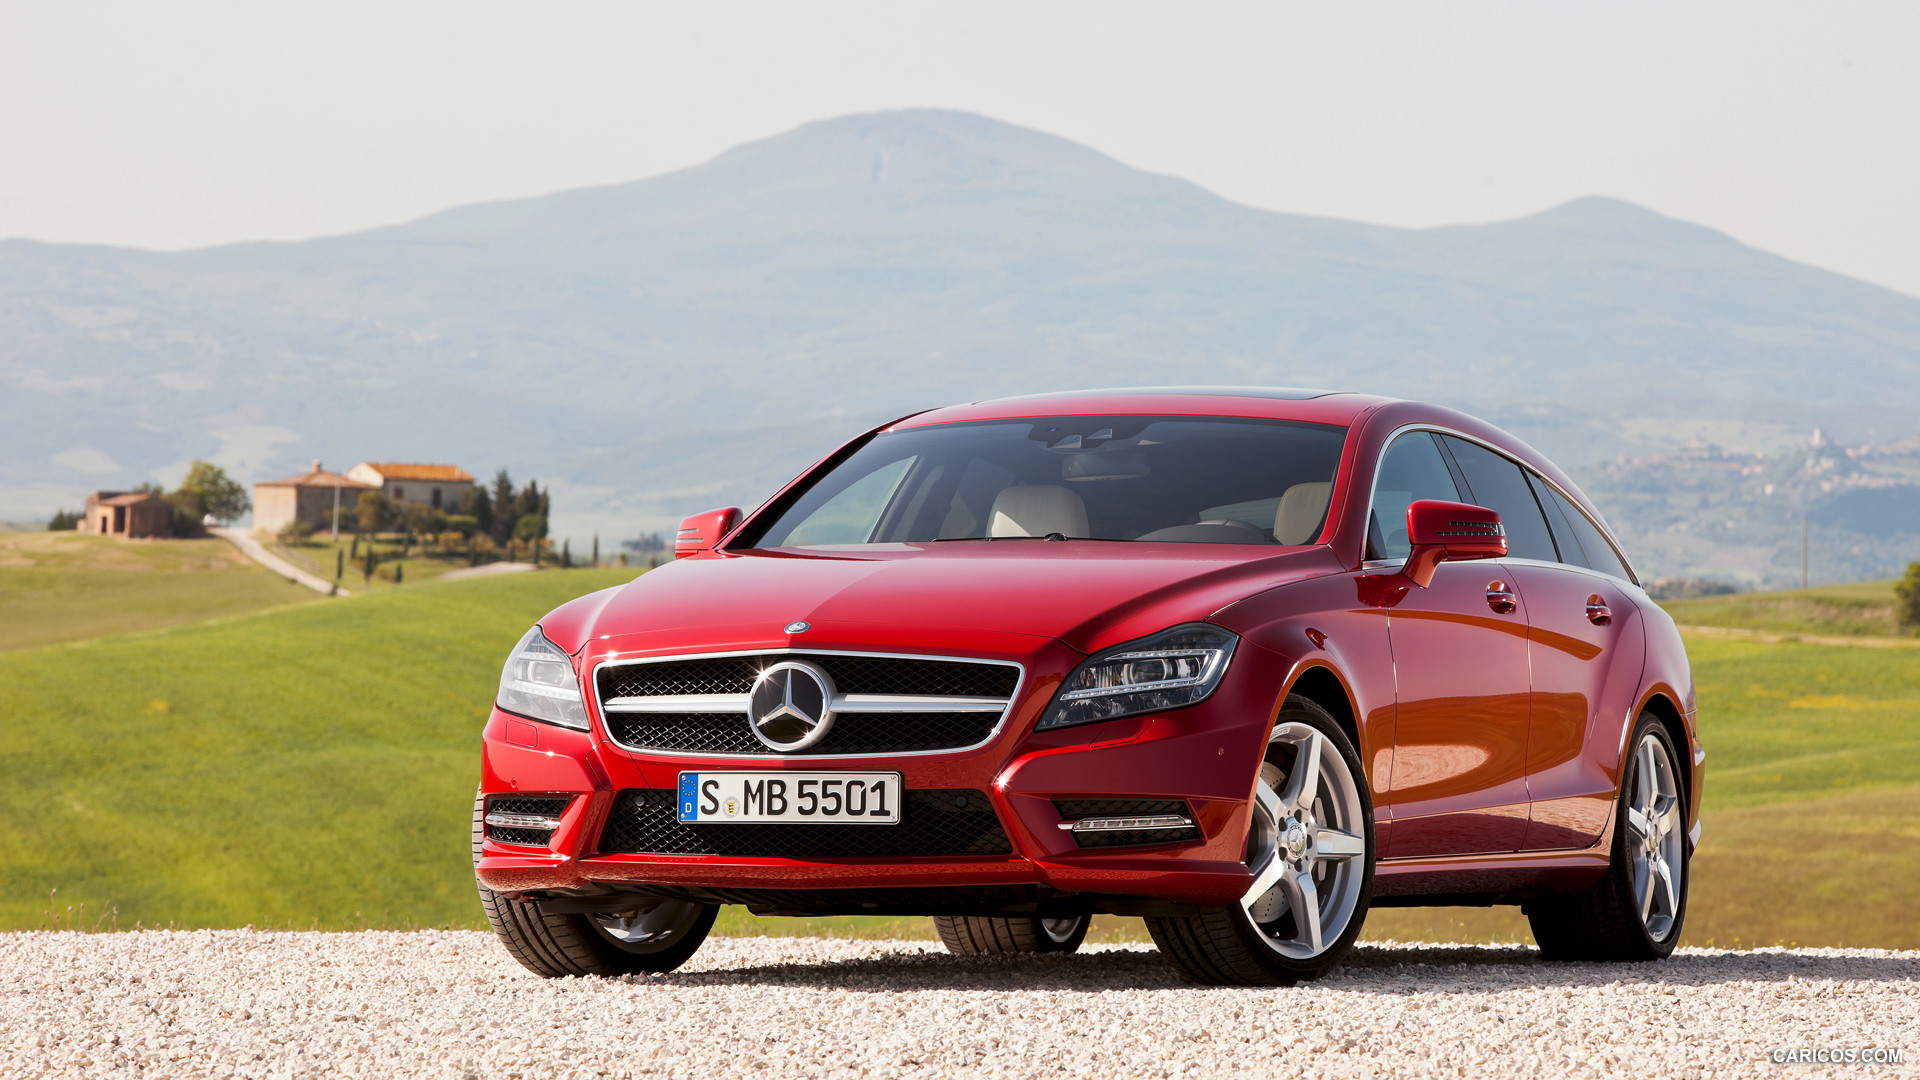 2013 Mercedes-Benz CLS 500 4MATIC Shooting Brake - Front, #1 of 184